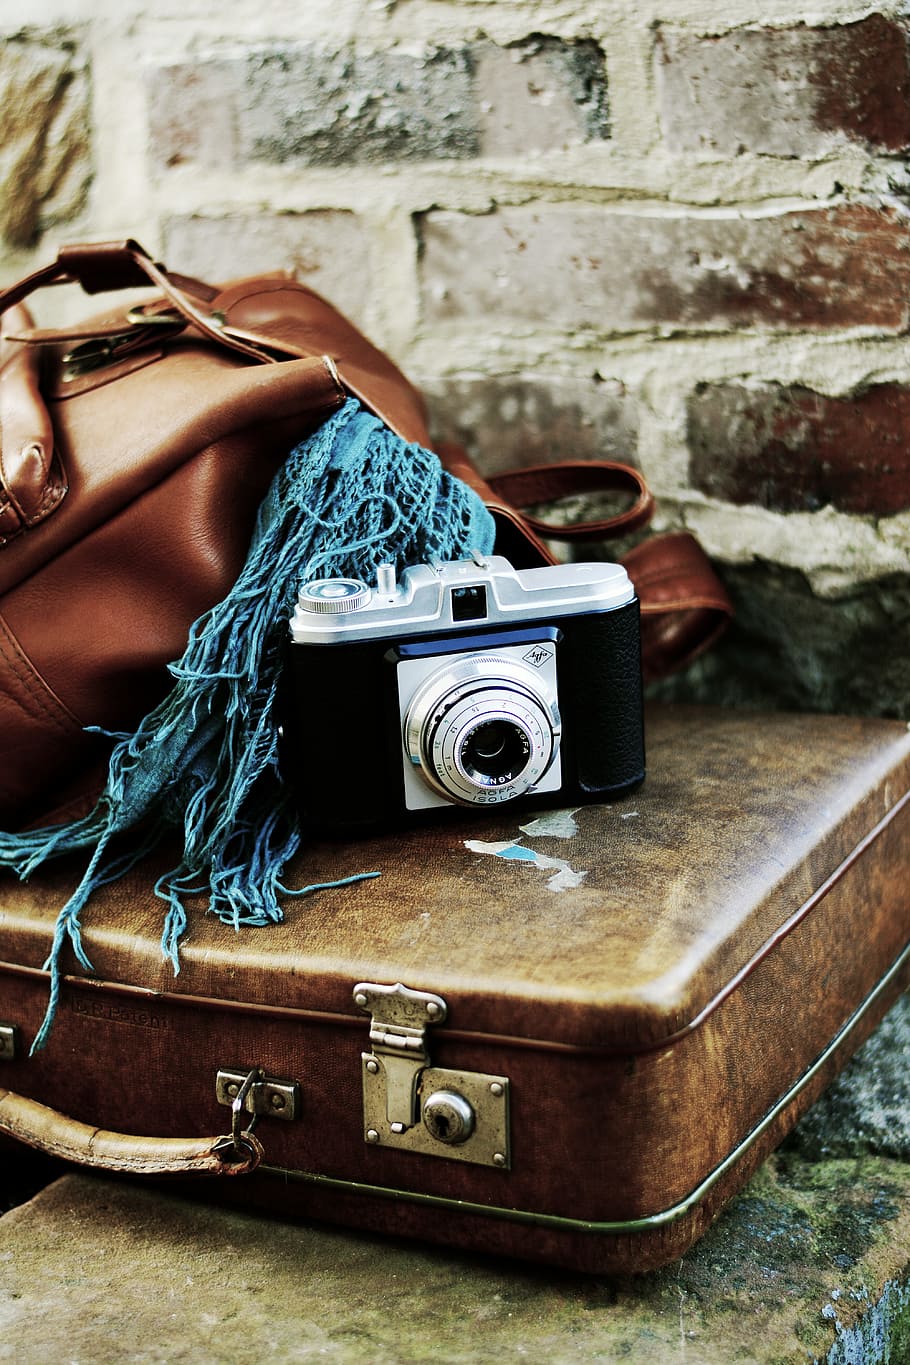 black, silver camera, luggage, leather suitcase, old suitcase, go away, turned off, travel, backpack, travel plans